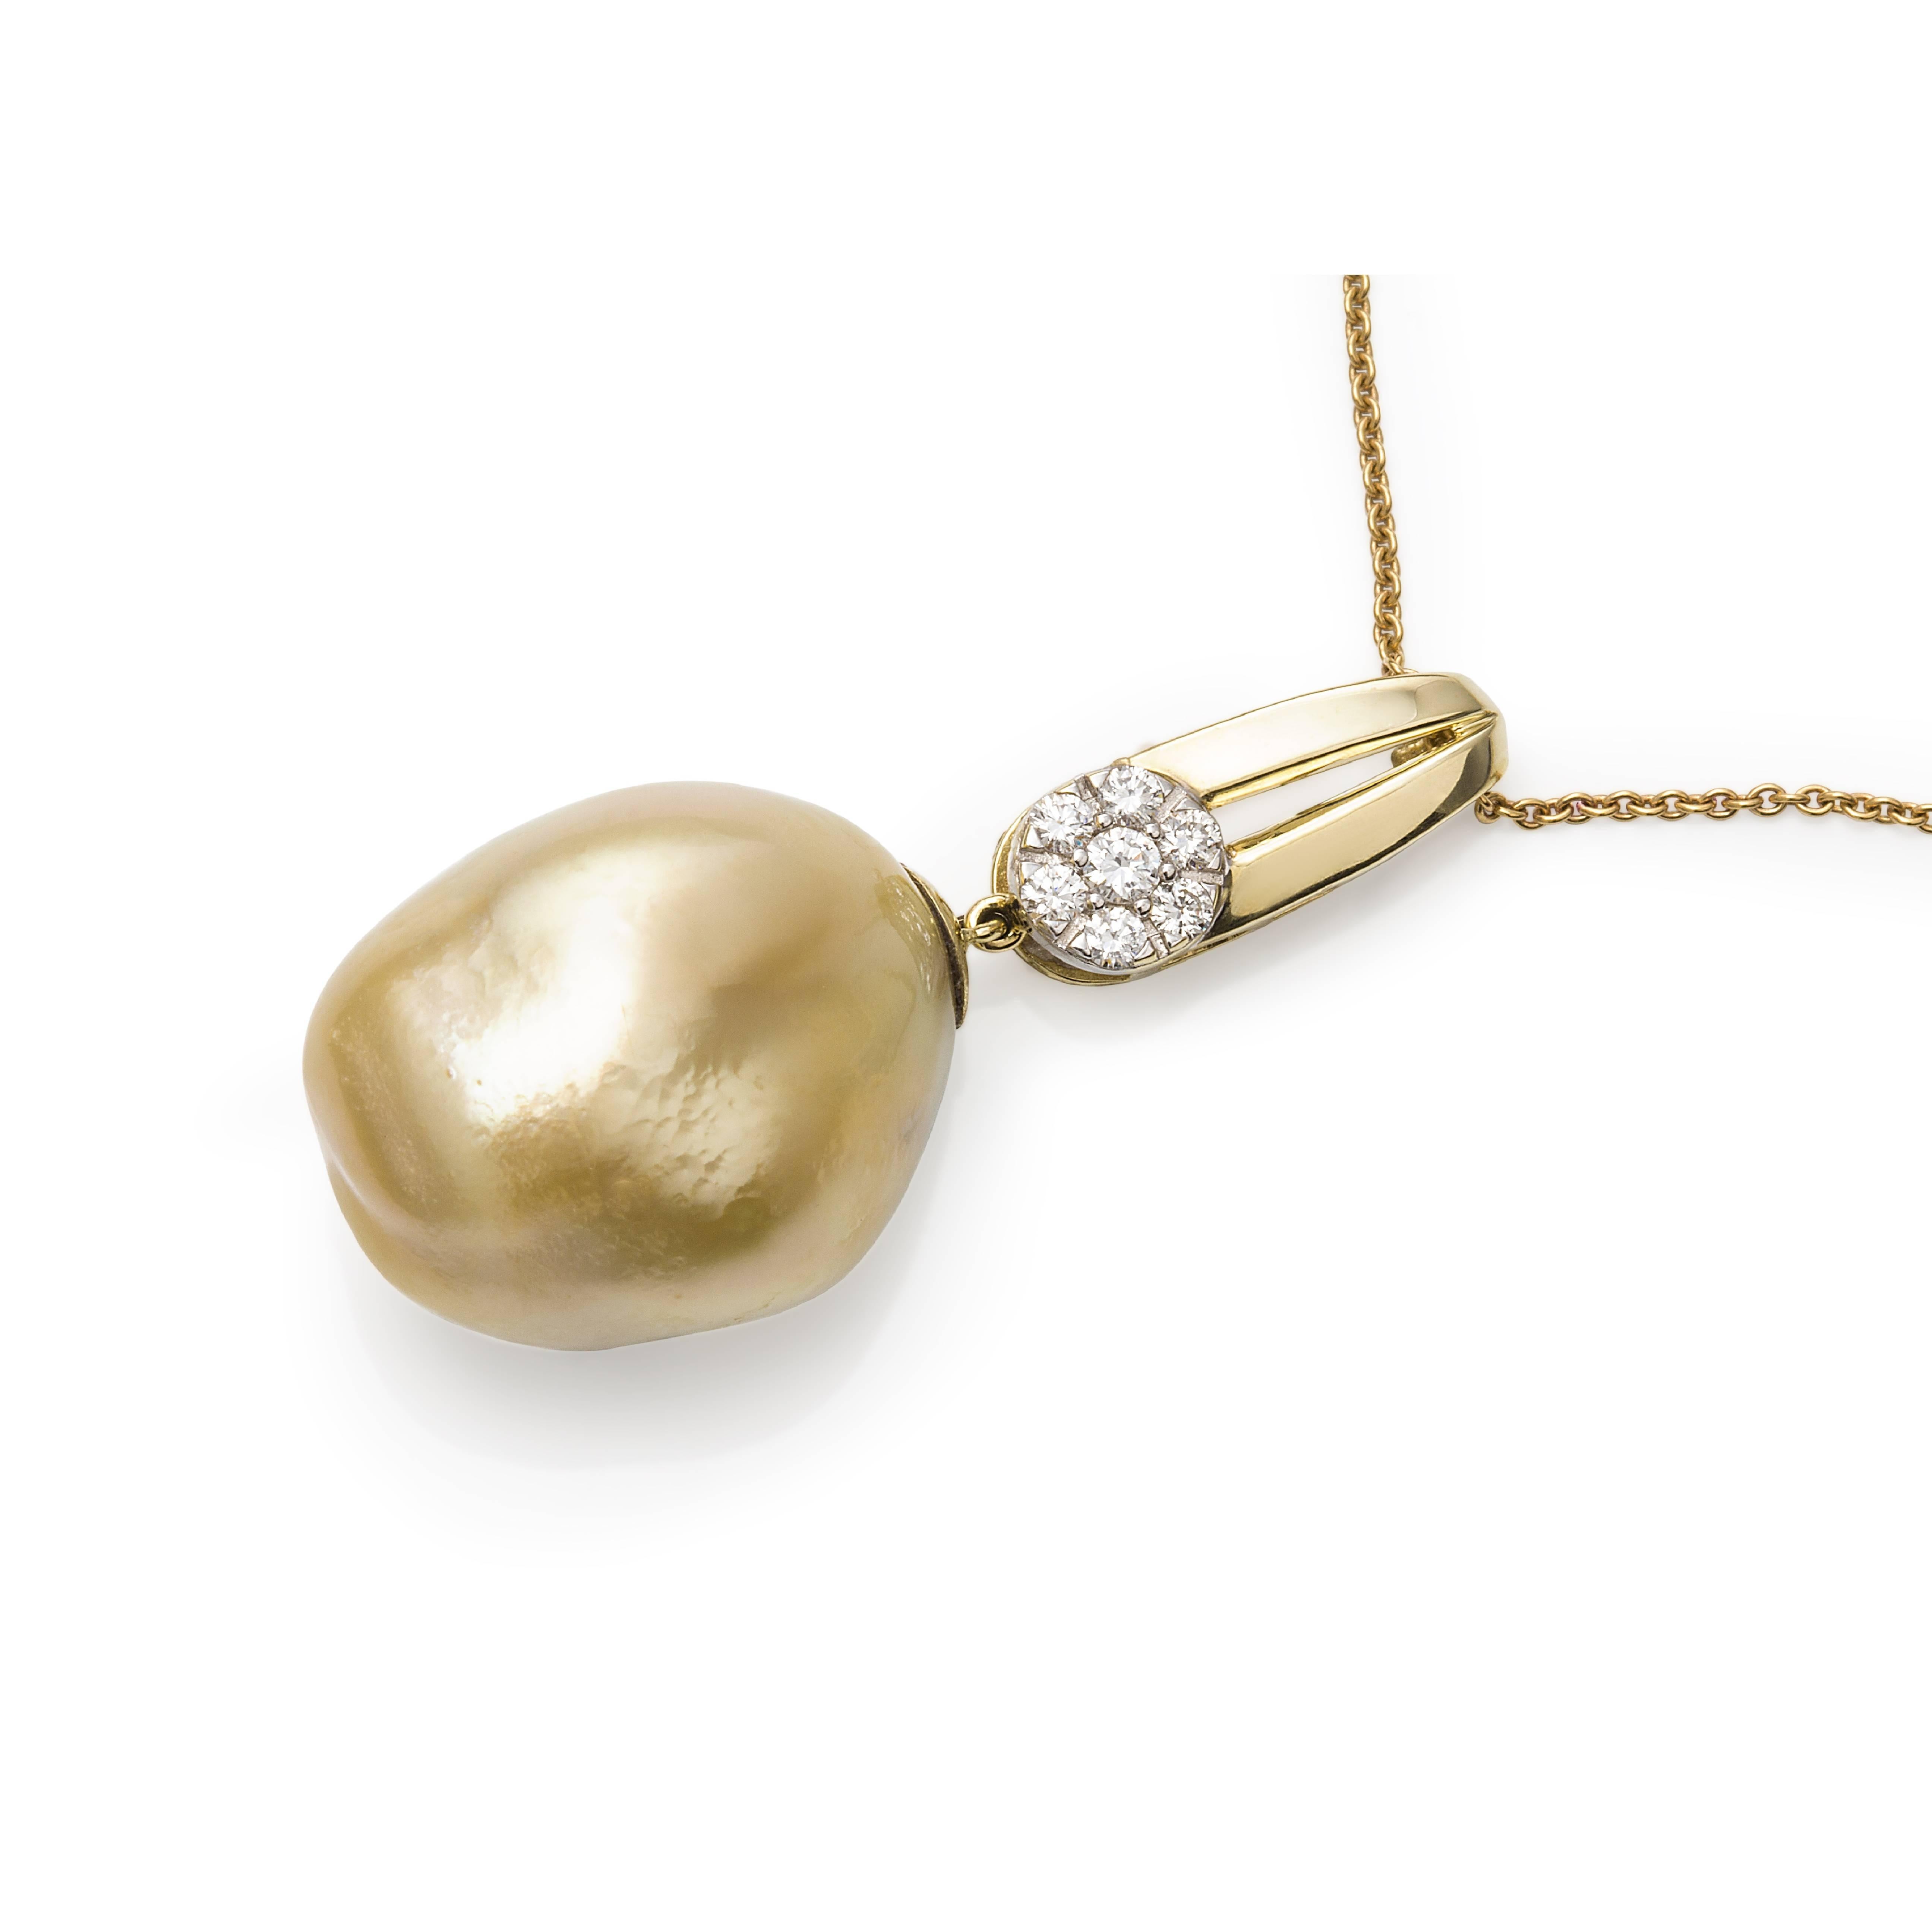 Only one piece...

Stunning baroque pearl pendant...

14 carat yellow gold oval split articulated pendant with a
claw setting holding 7 diamonds with total of 0.28 carat of white diamonds with a golden South Sea baroque pearl of 18.1 mm x 22 mm. 